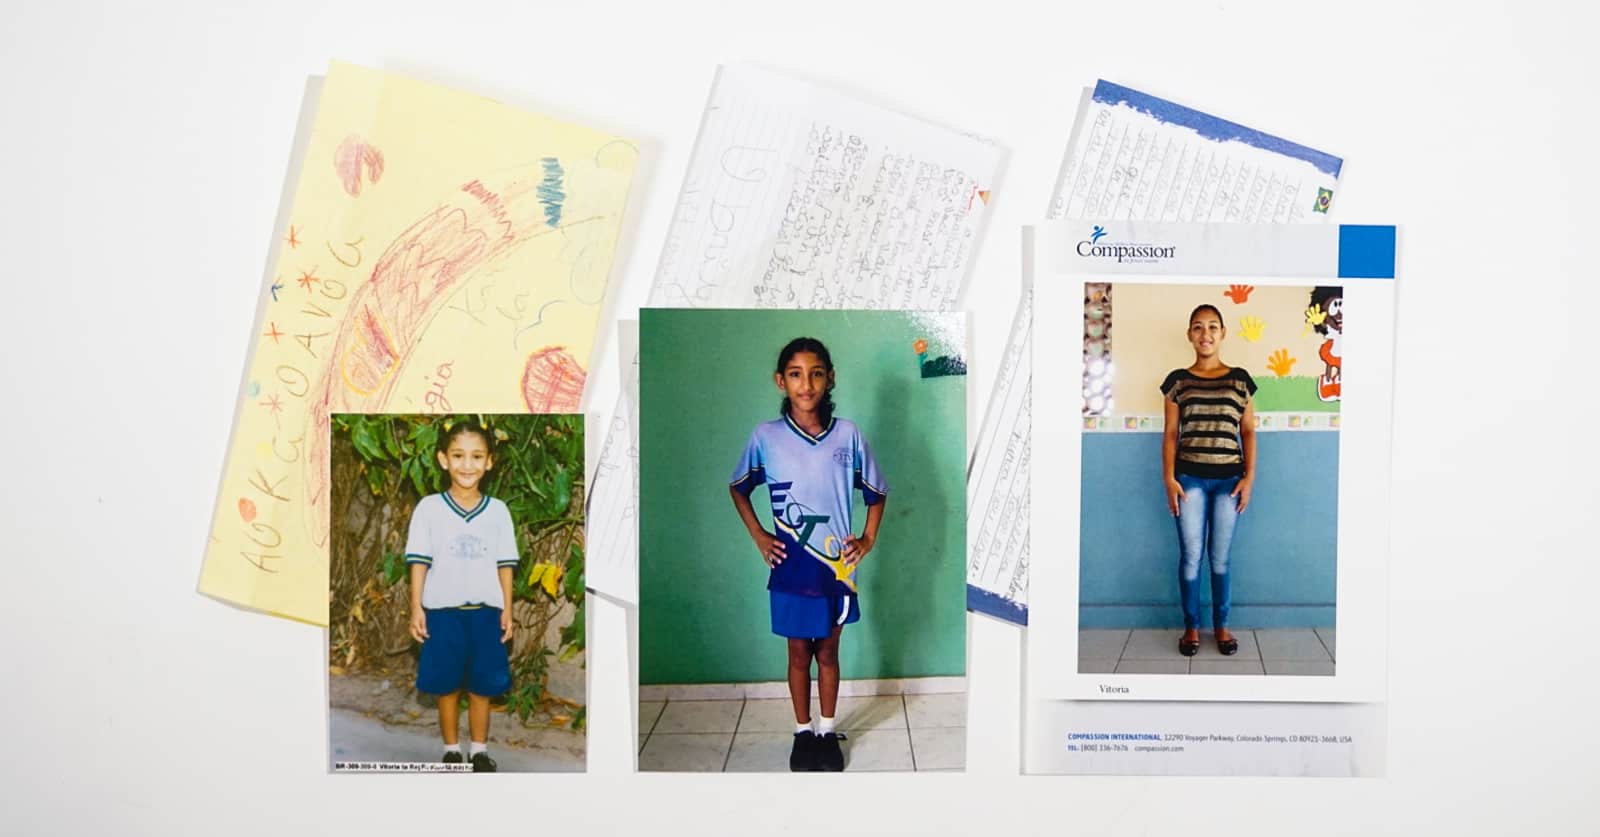 How to Write Your Compassion Letters to Be Age Appropriate: Three pictures of a girl at different ages, set over letters.